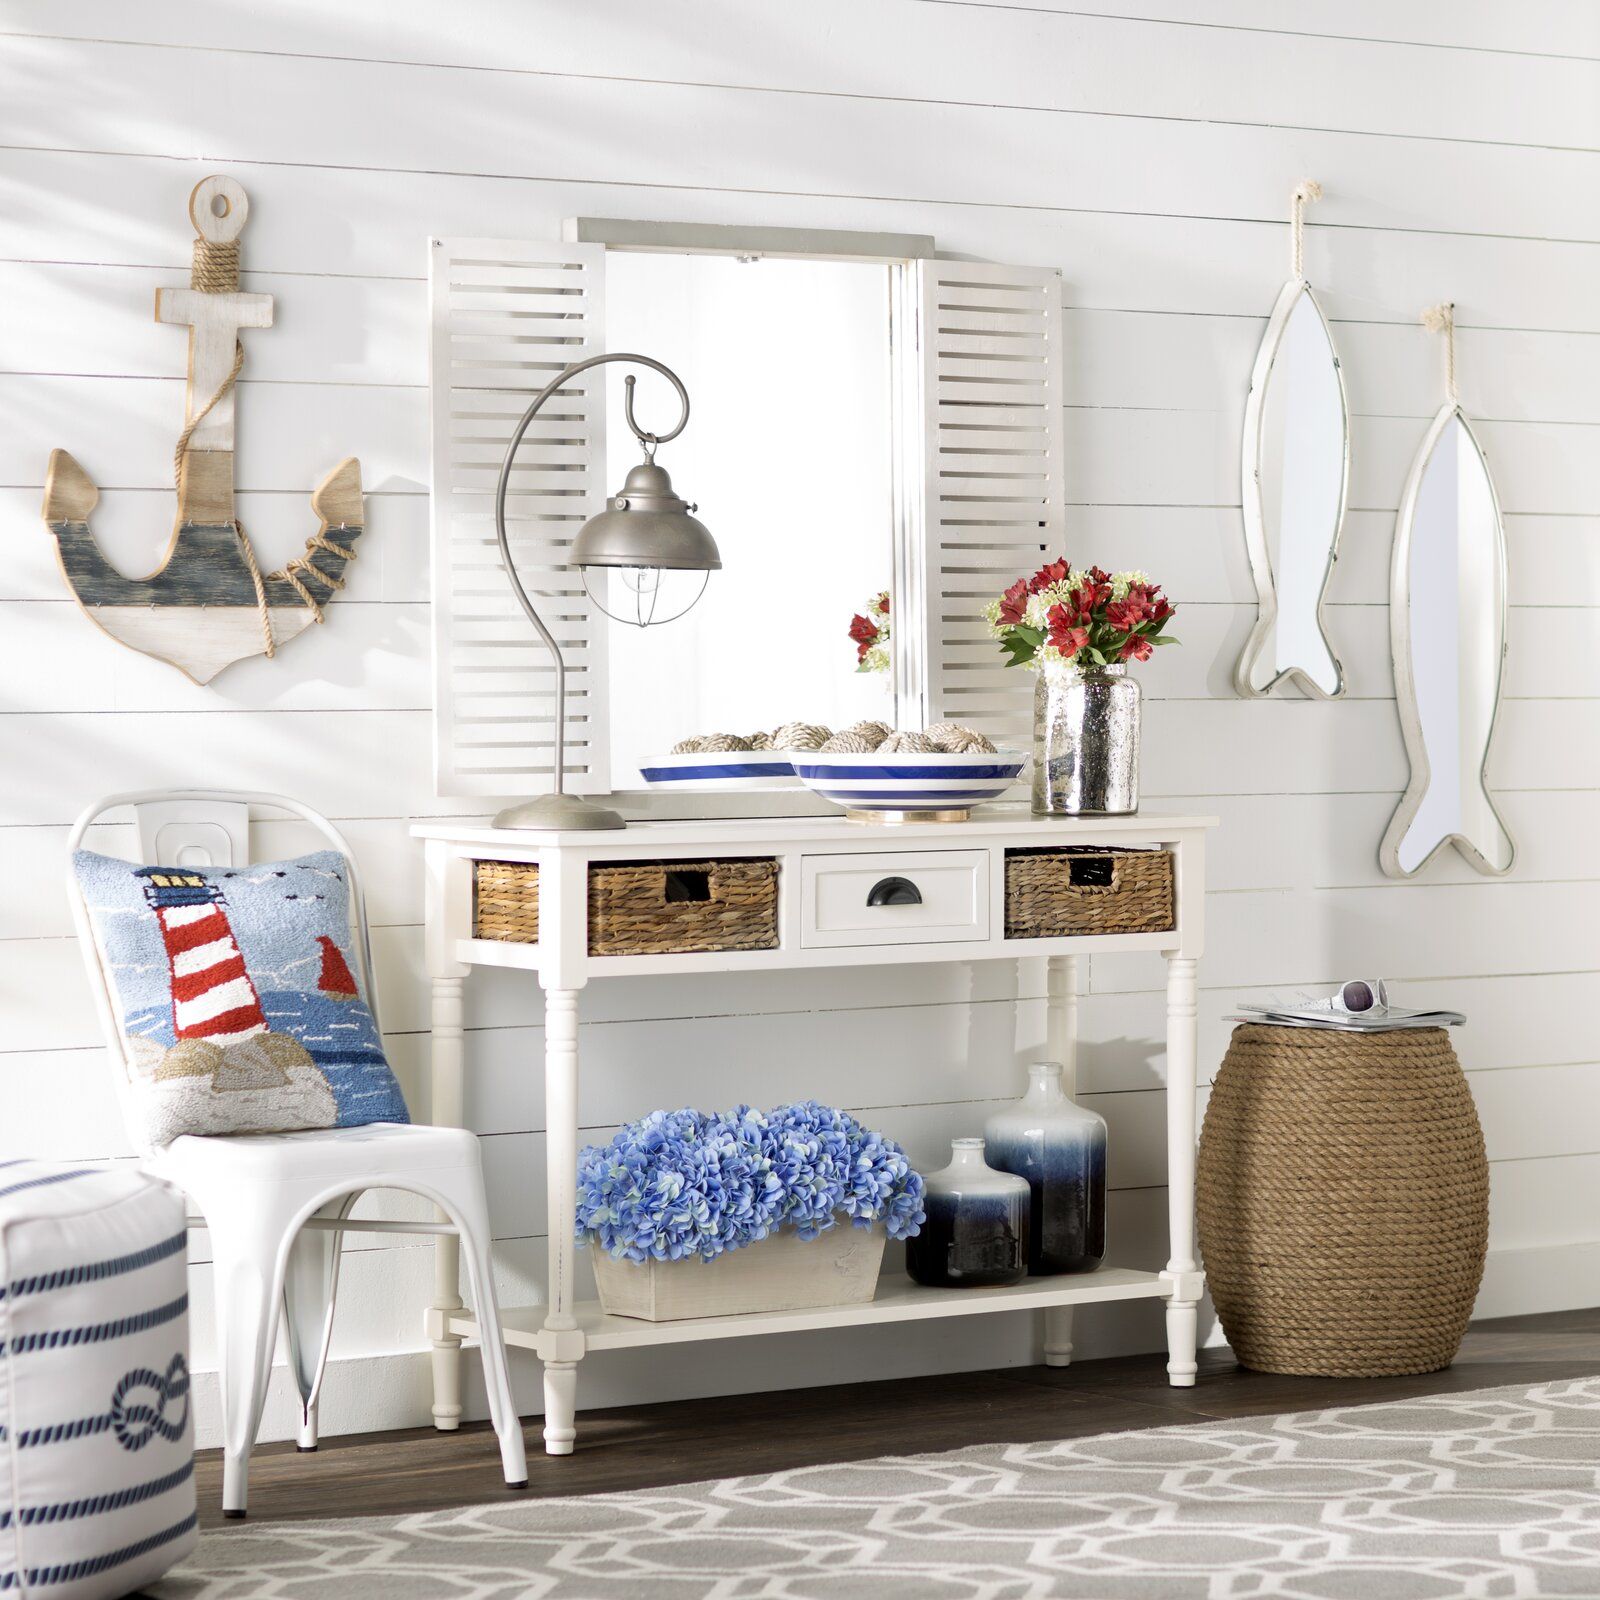 Entryway table featuring a coastal theme with seashells and nautical decor